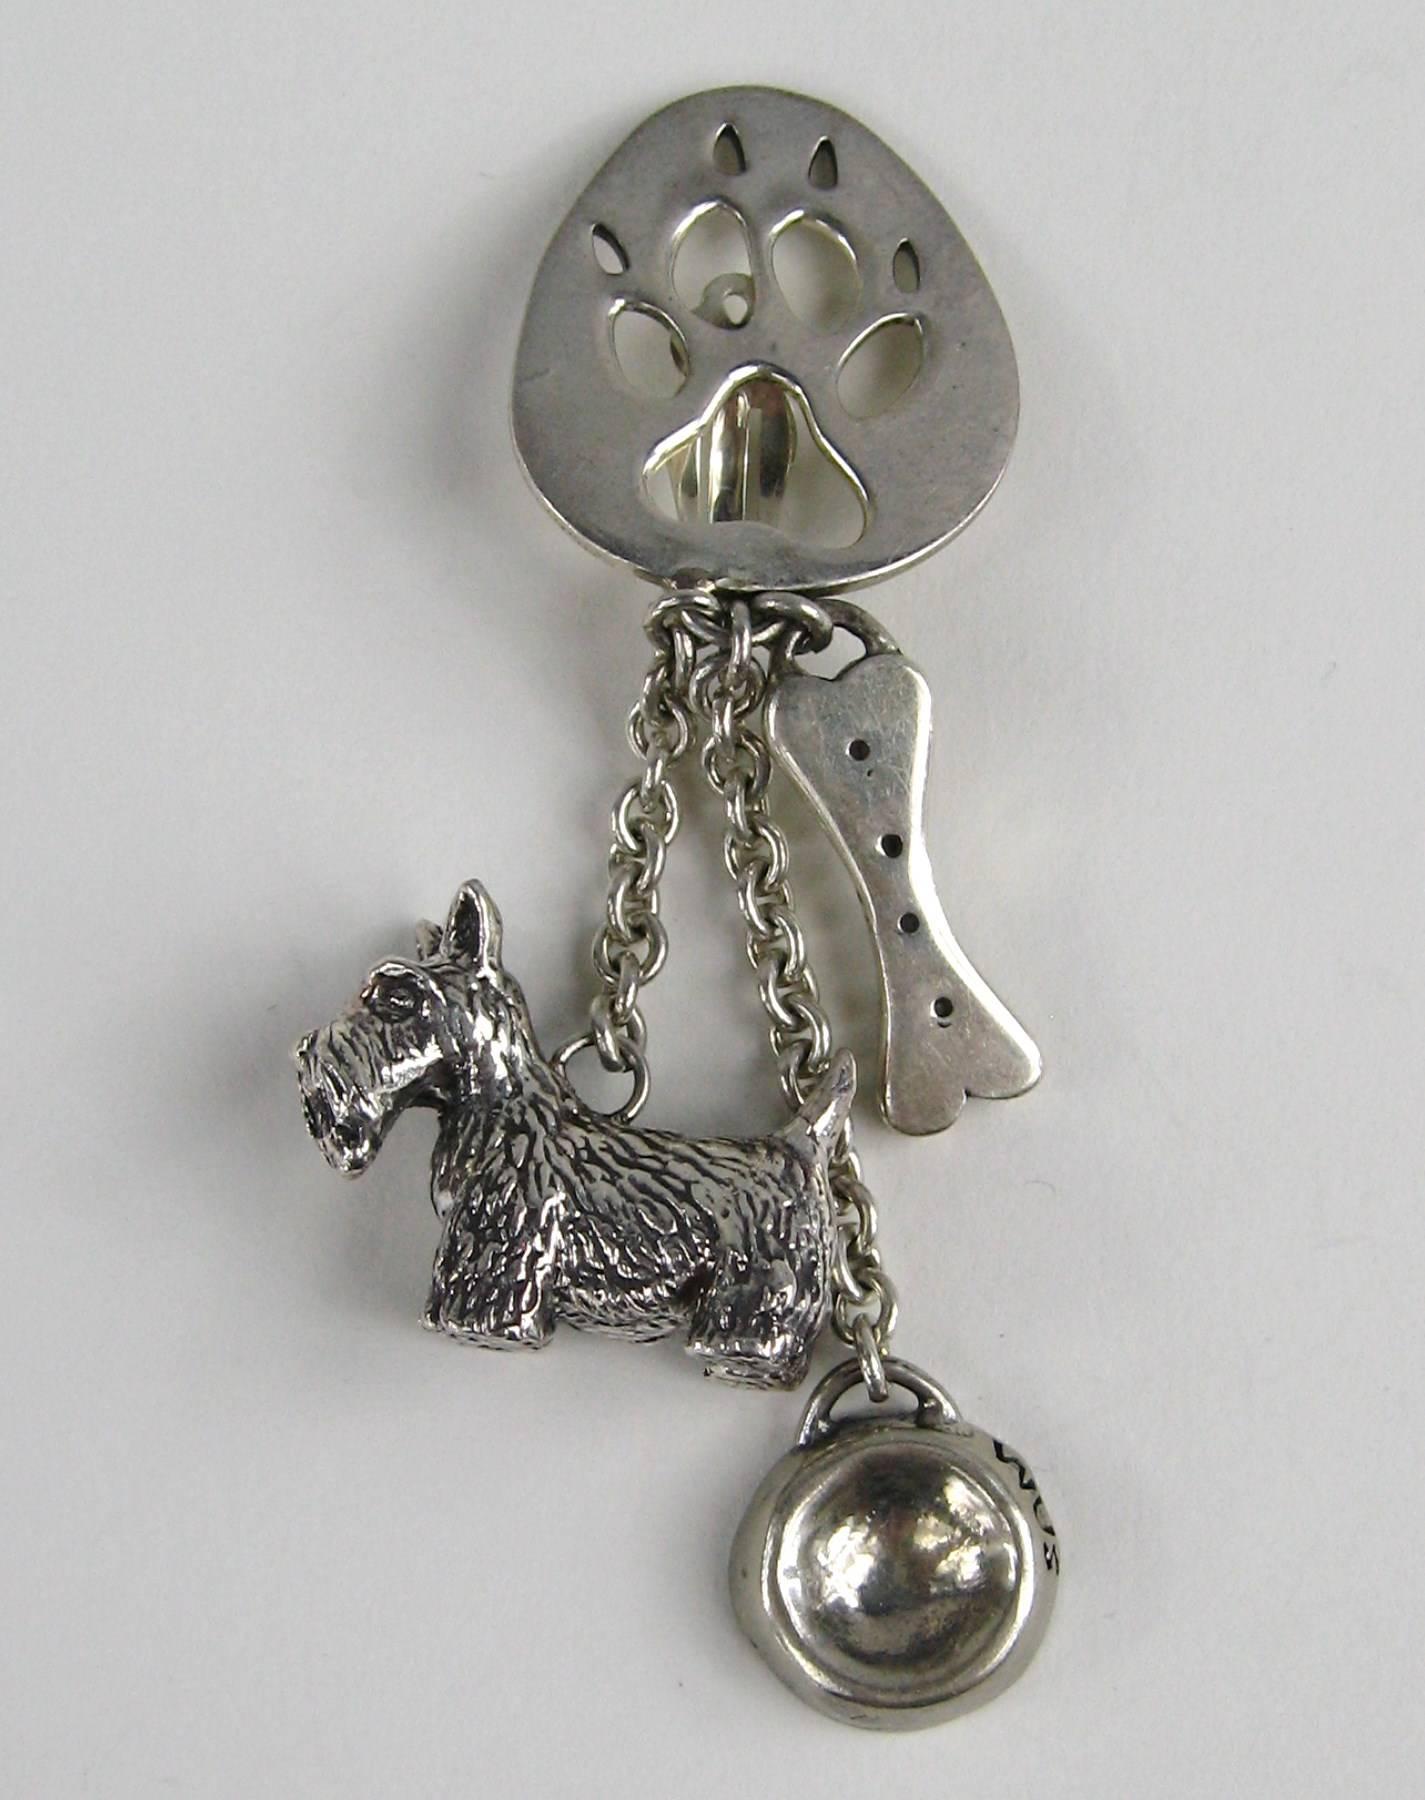 Susan Cummings adorable Dangle Clip on's earrings 3-D Dog along with a dog bone and bowl Measuring 3.25 inches long .84 wide on your ear lobe. There are more pieces of Cummings on our storefront. This is out of a massive collection of Hopi, Zuni,